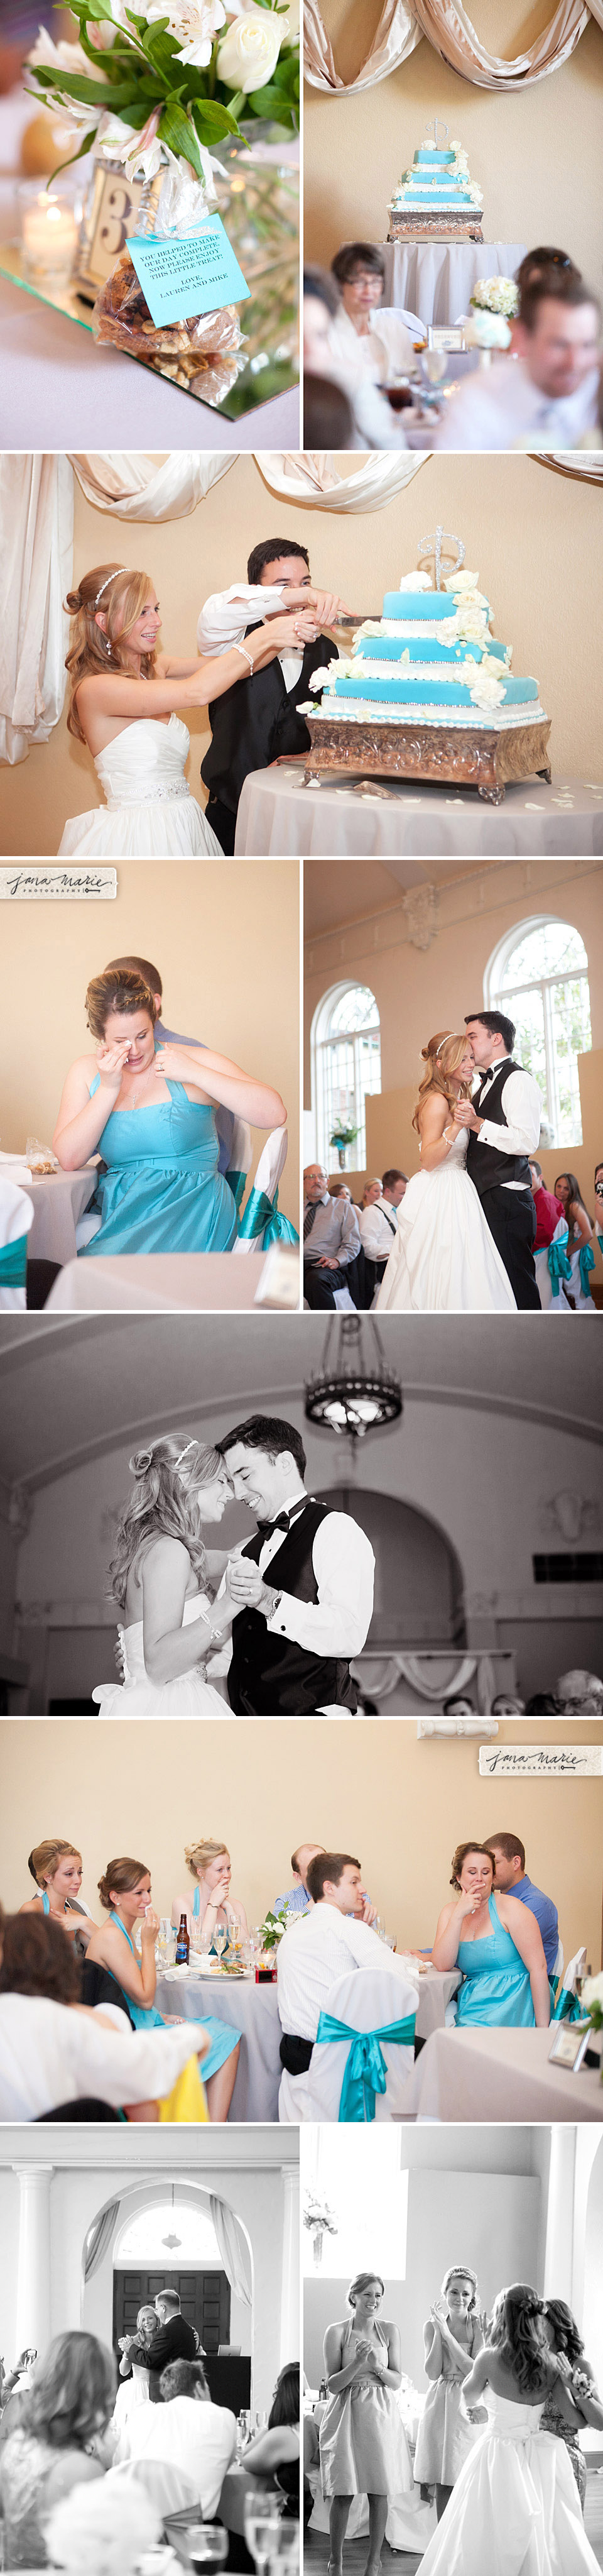 First dance as couple, The Villa, Blue silver and white, Ice cream, Modern receptions, Jana Marler